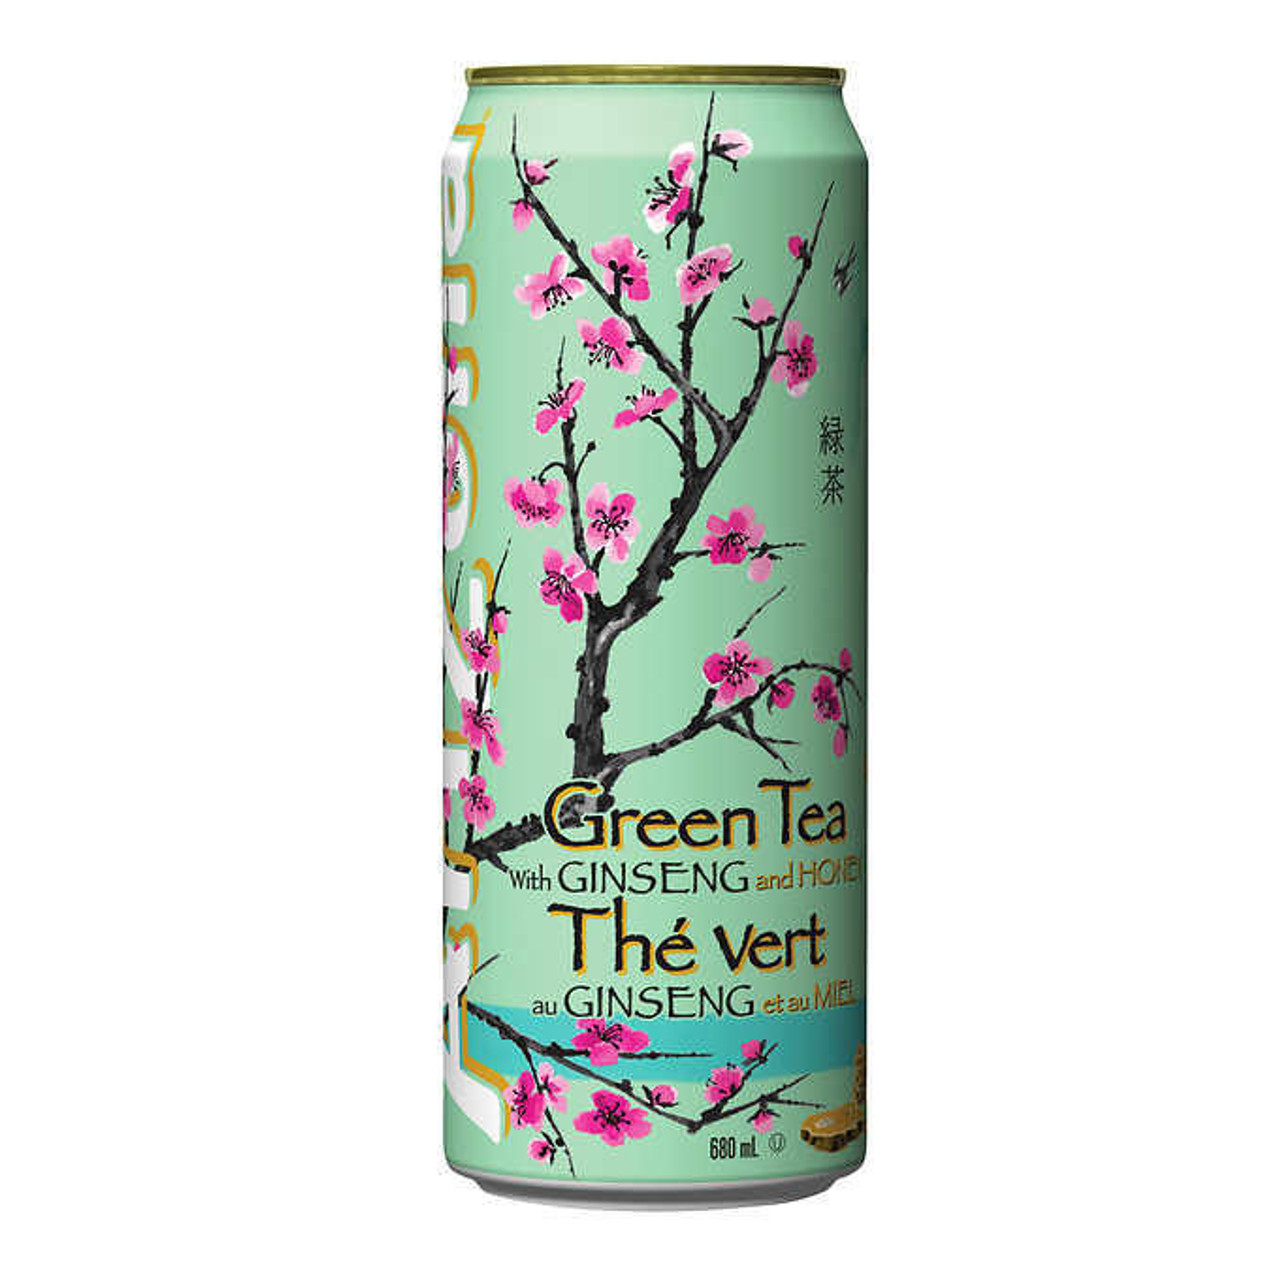  ARIZONA Green Tea with Ginseng and Honey | 24-Pack | 680ml Cans | Refreshing Beverage 